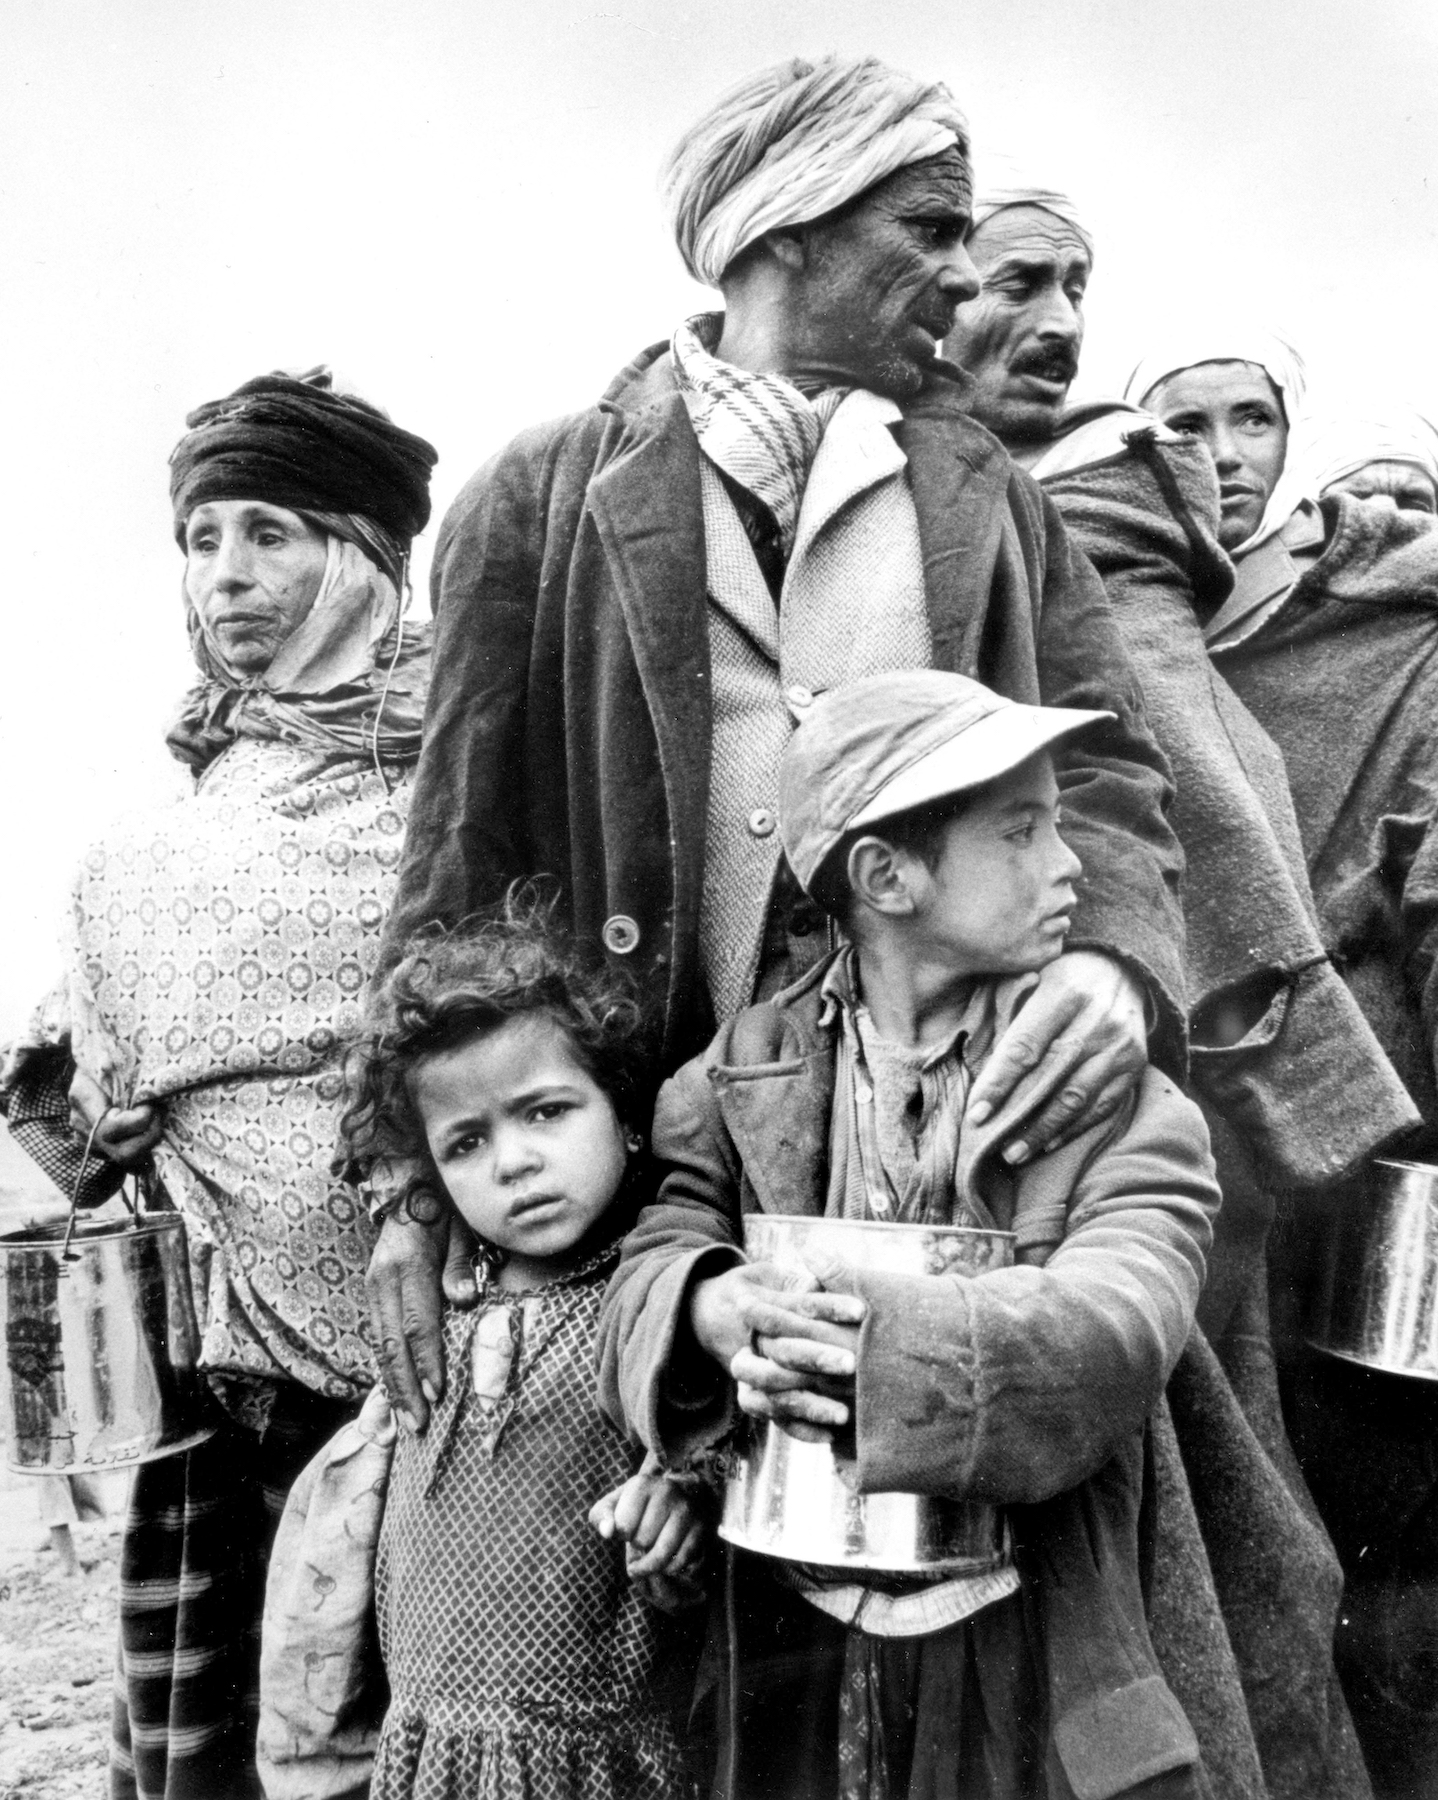 Algerian refugees gathered at Oued R'man near Le Kef in Tunisia for a distribution of food by the Red Crescent Society, 1959. Original Black and white picture